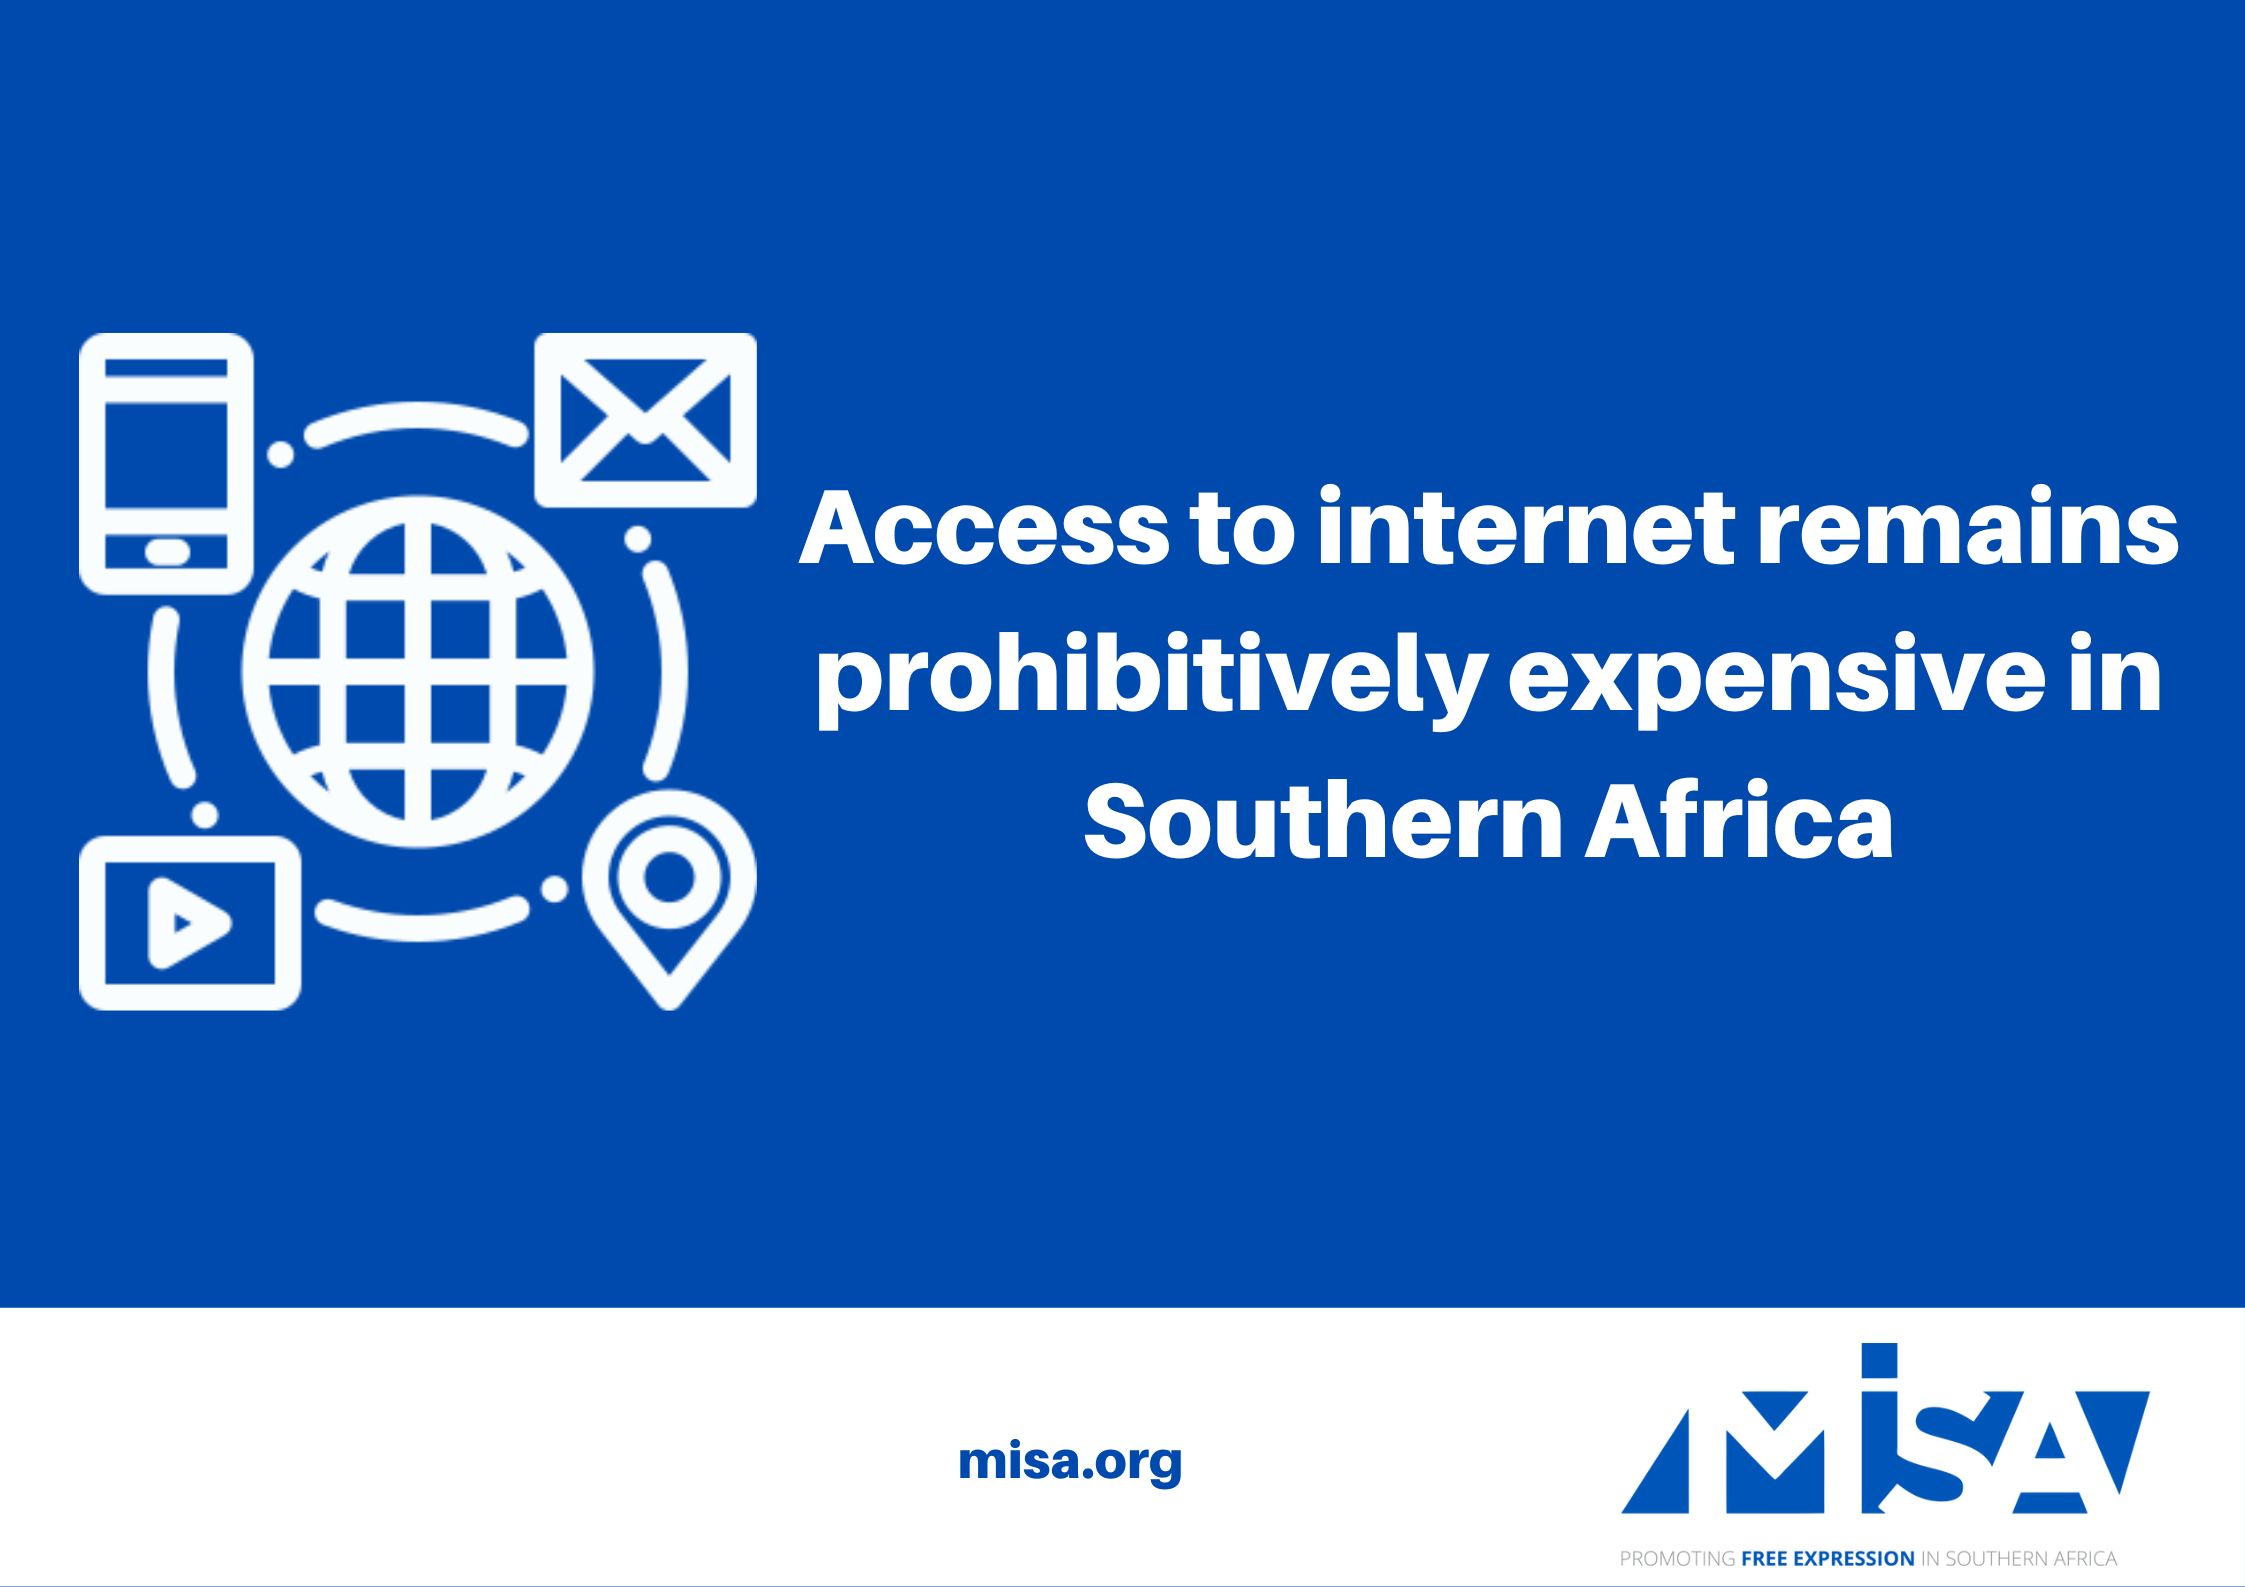 Access to internet remains prohibitively expensive in Southern Africa